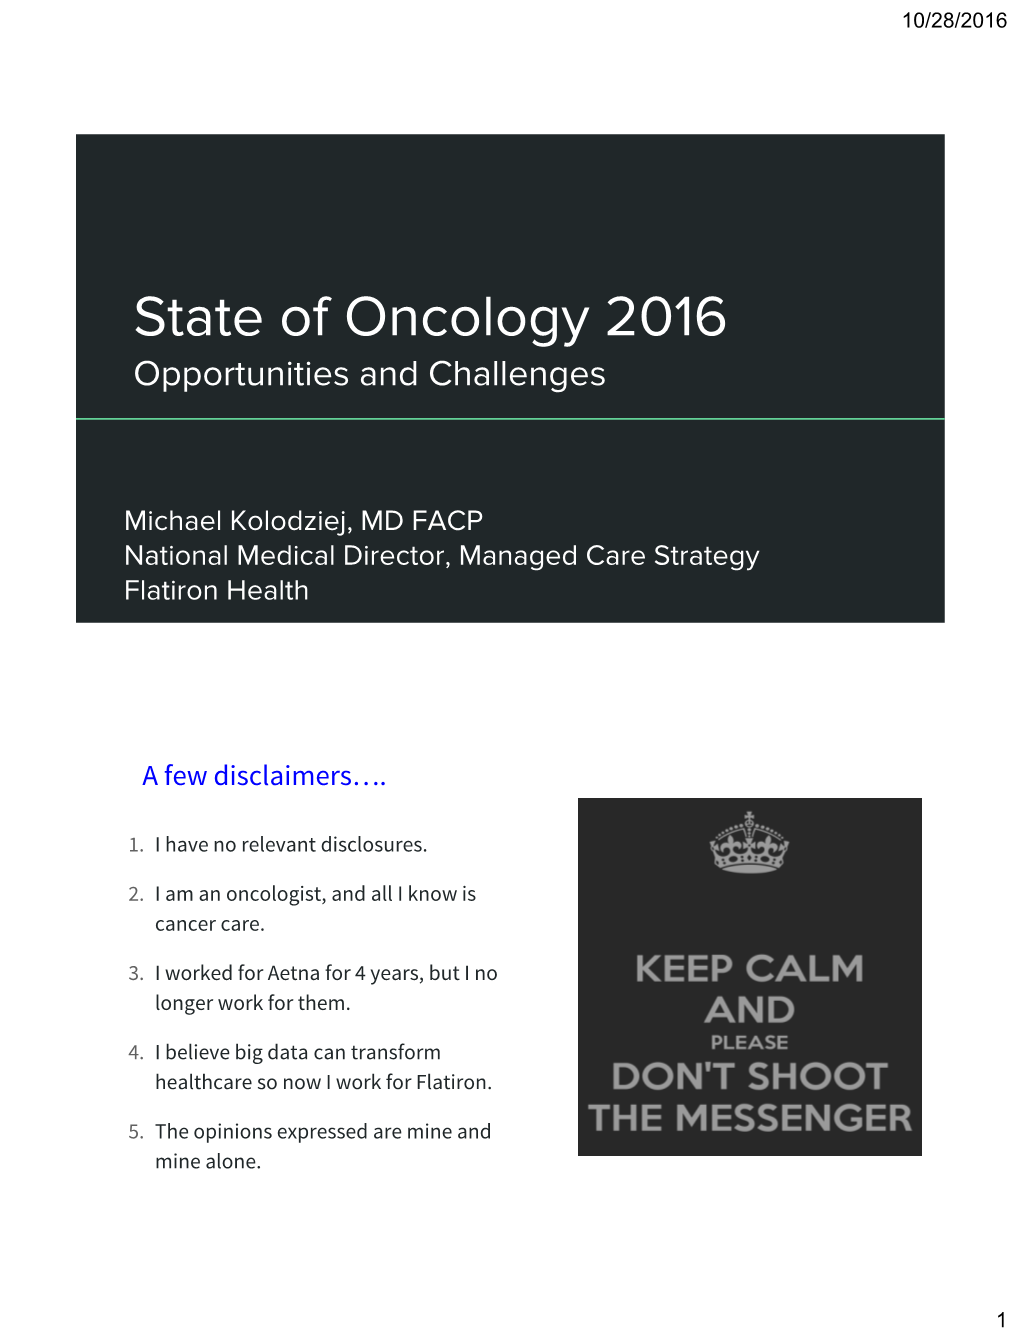 State of Oncology 2016 Opportunities and Challenges